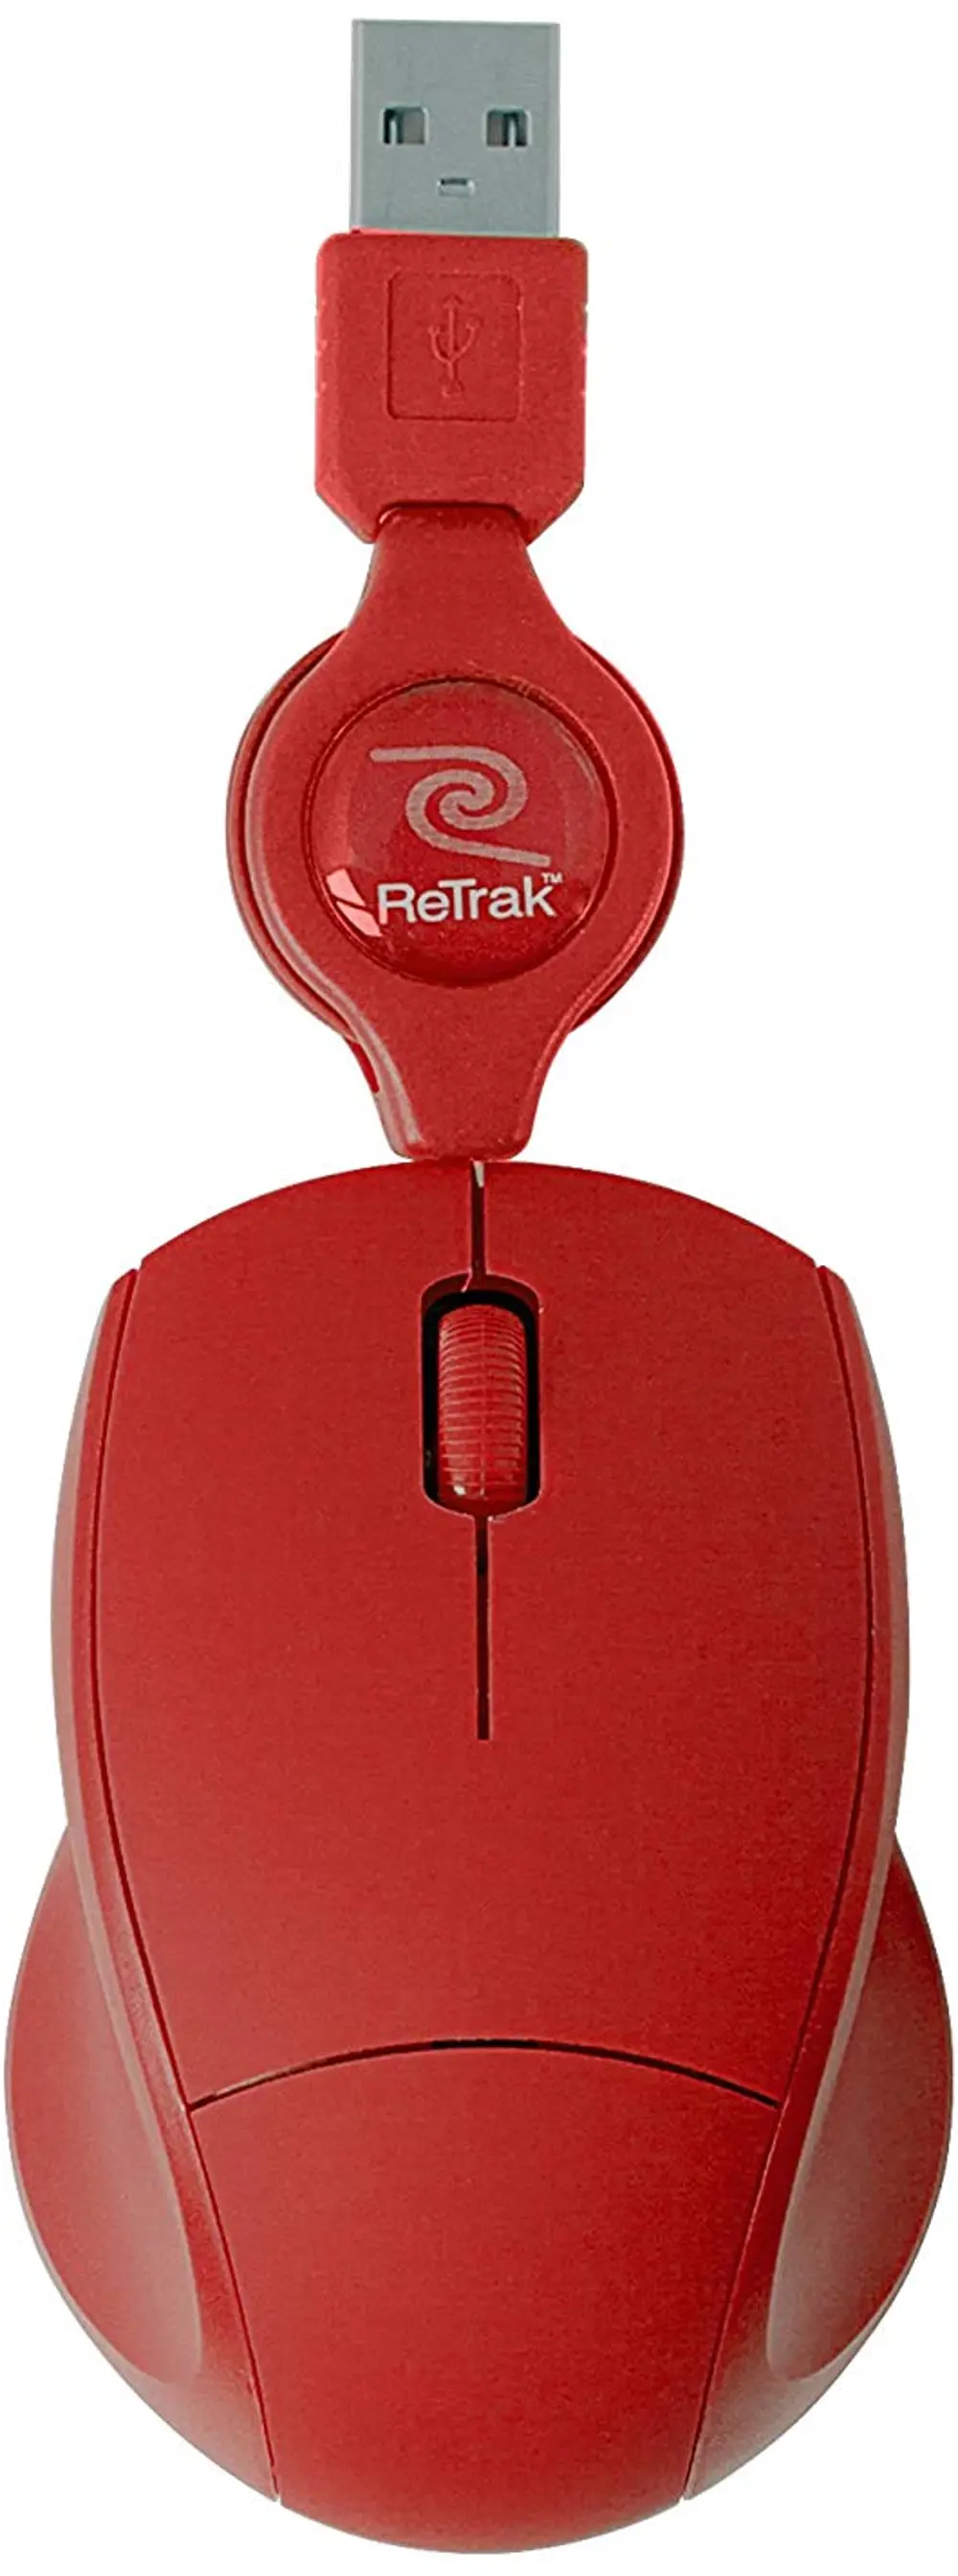 ETMOUSERED RED RETRACTABLE OPTICAL MOUSE Red ReTrak Retractable Optical Mouse-1